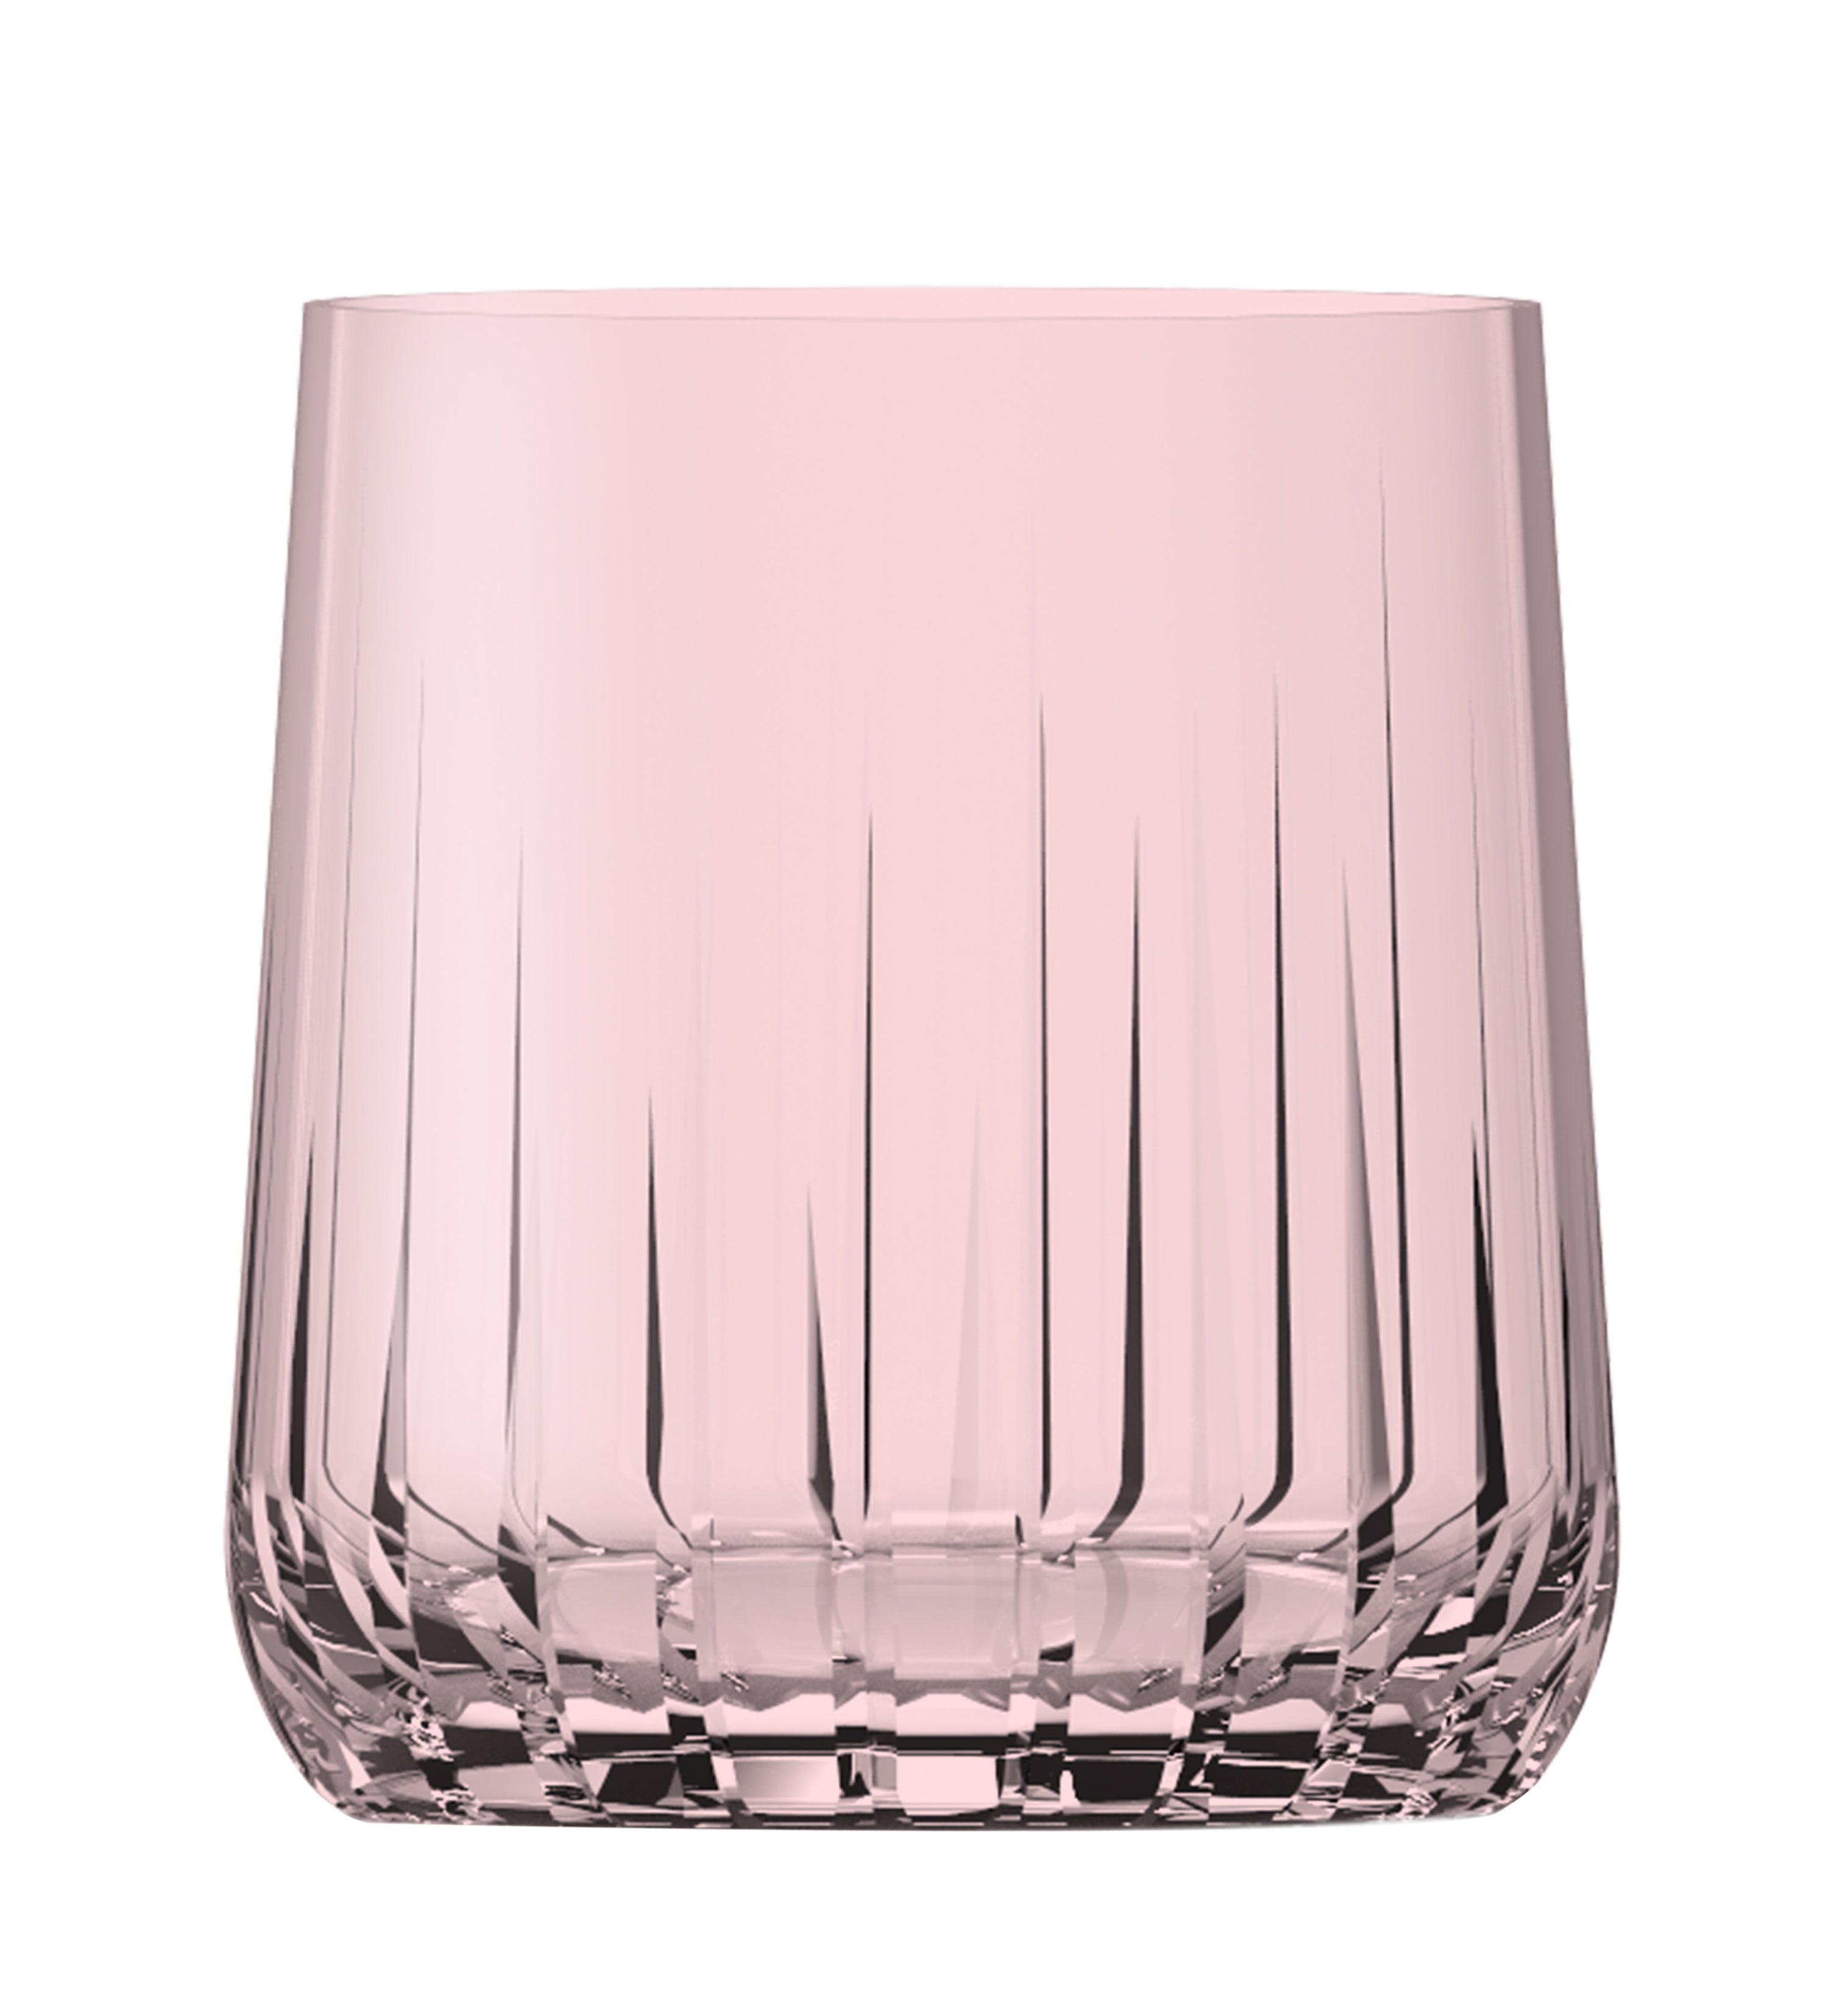 Pasabahce Nova Double Old Fashioned Glass - Pink, 315ml